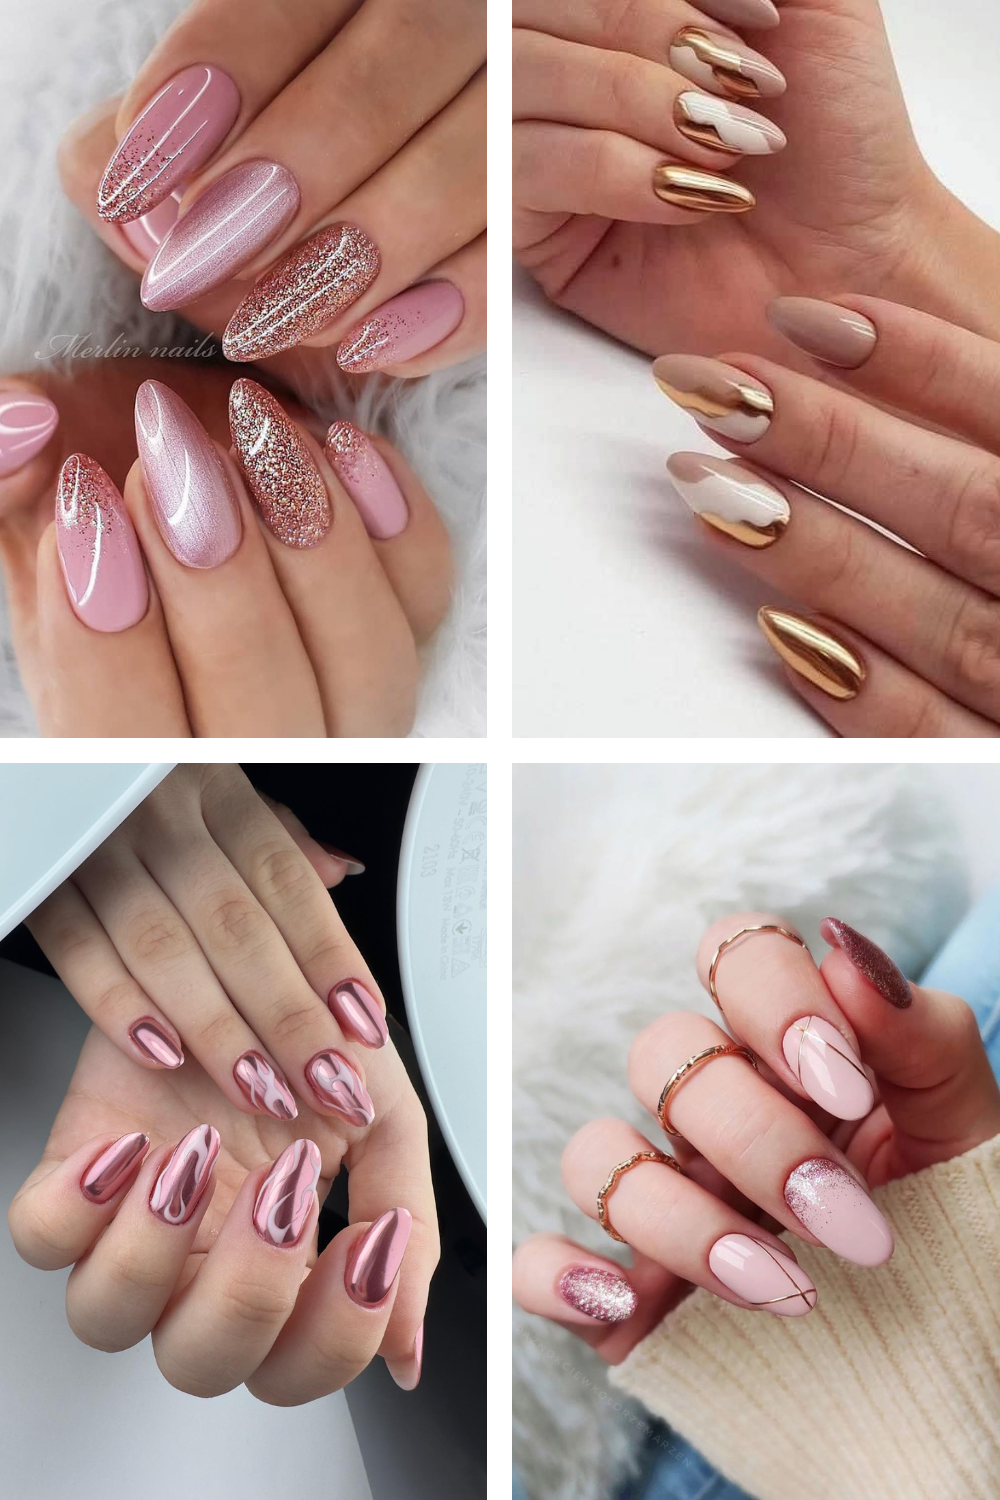 39 Dreamy Rose Gold Nail Designs To Fall in Love With!